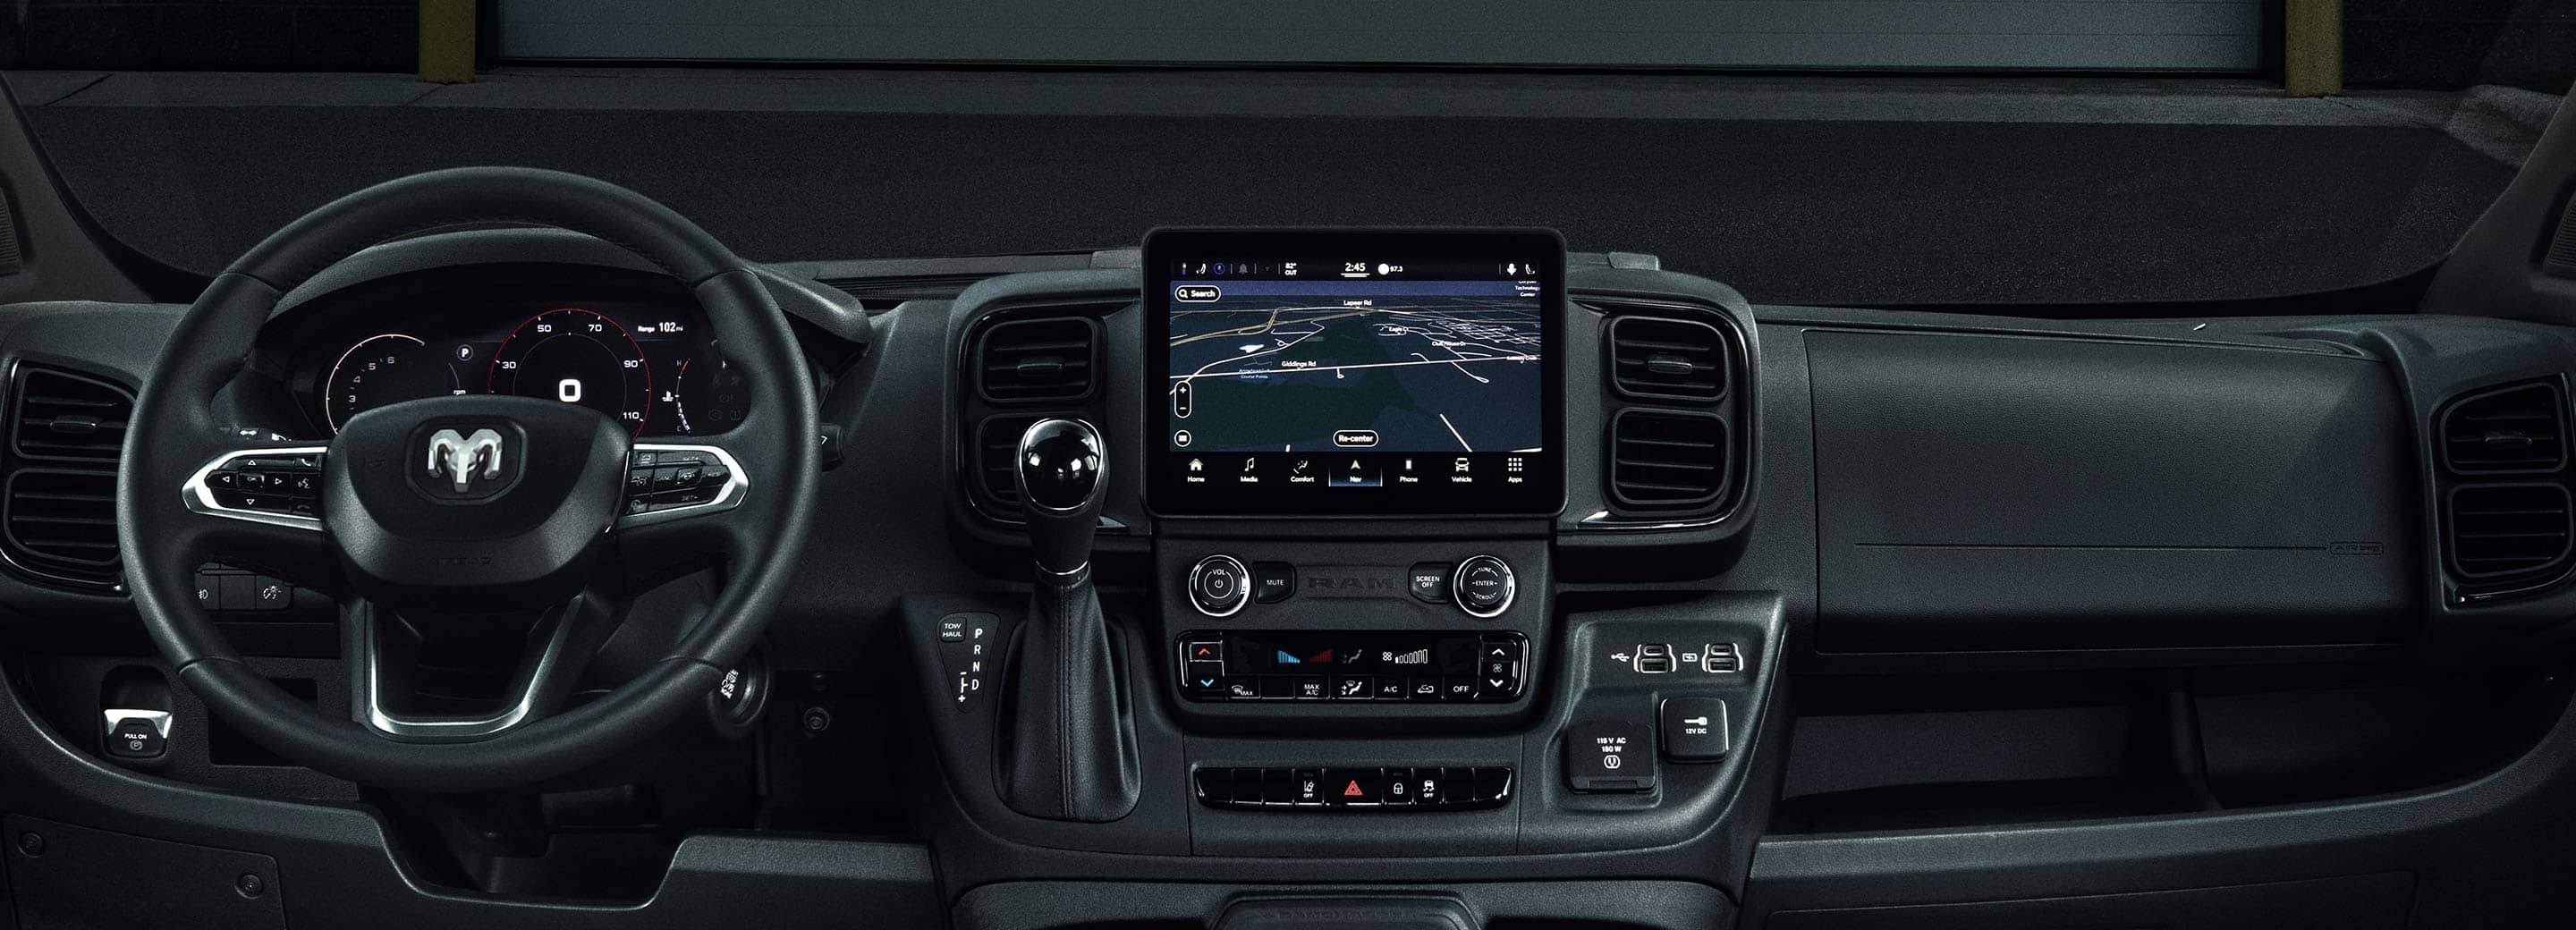 The interior of the 2023 Ram ProMaster, focusing on the steering wheel, touchscreen and climate controls.